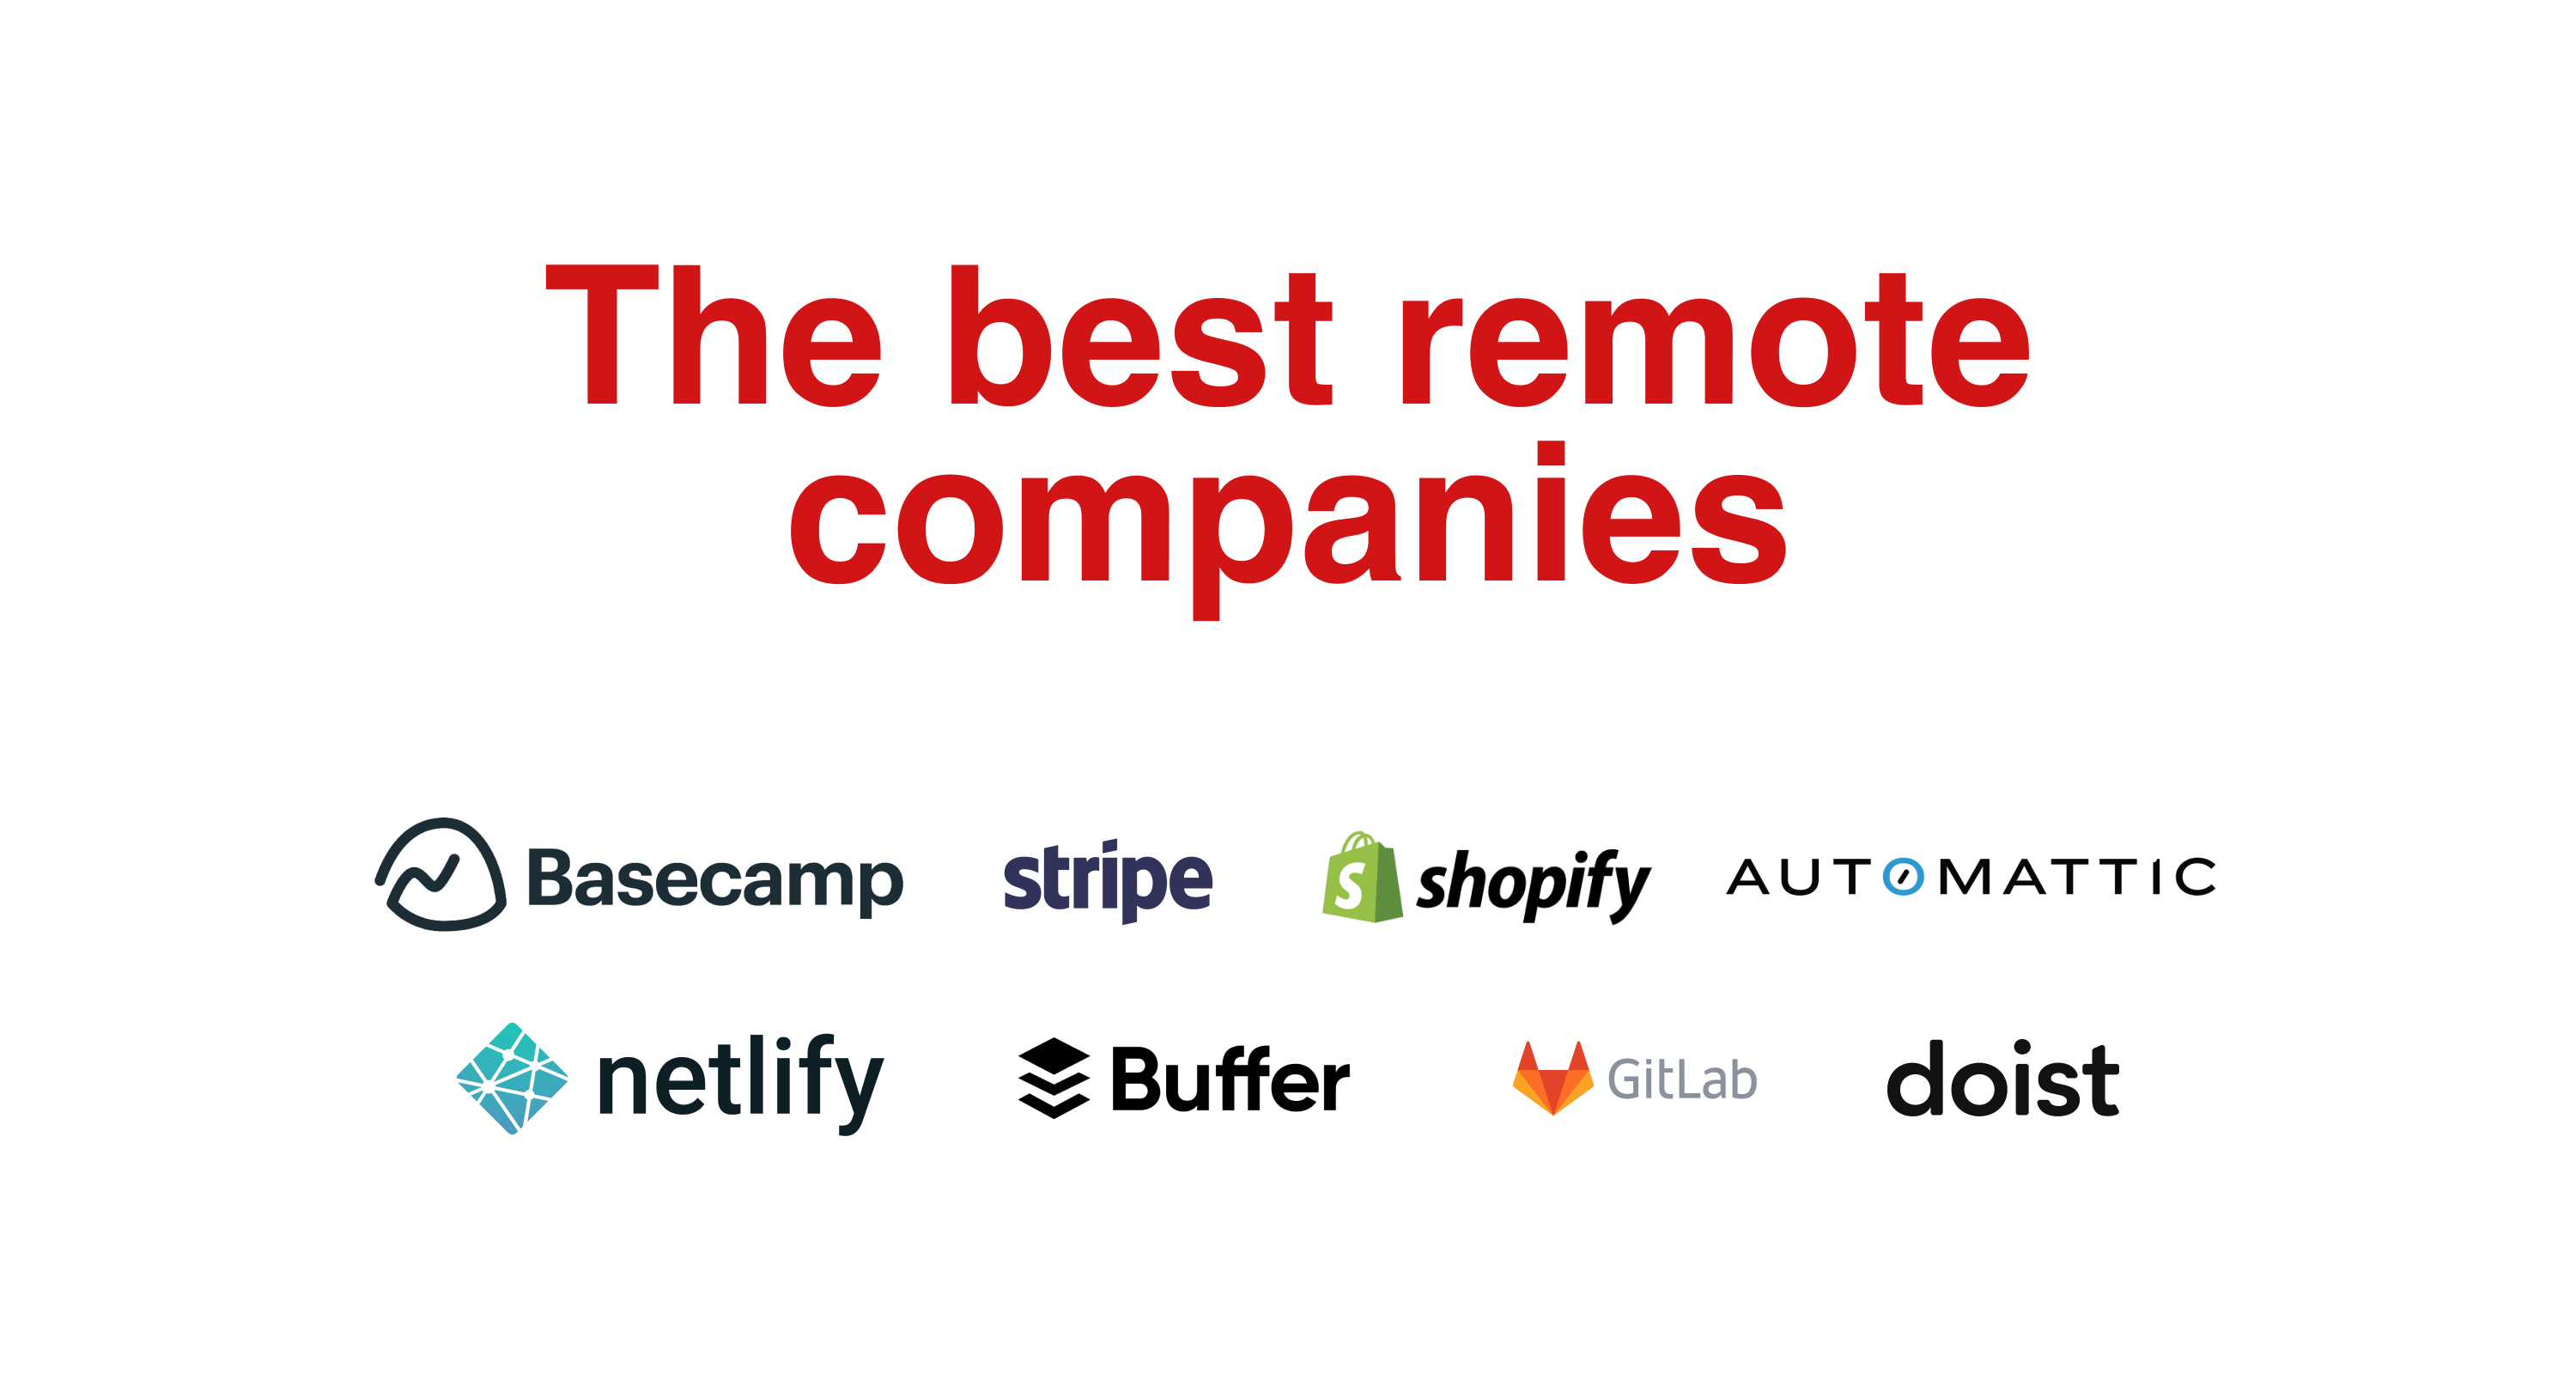 The best companies you can work for remotely